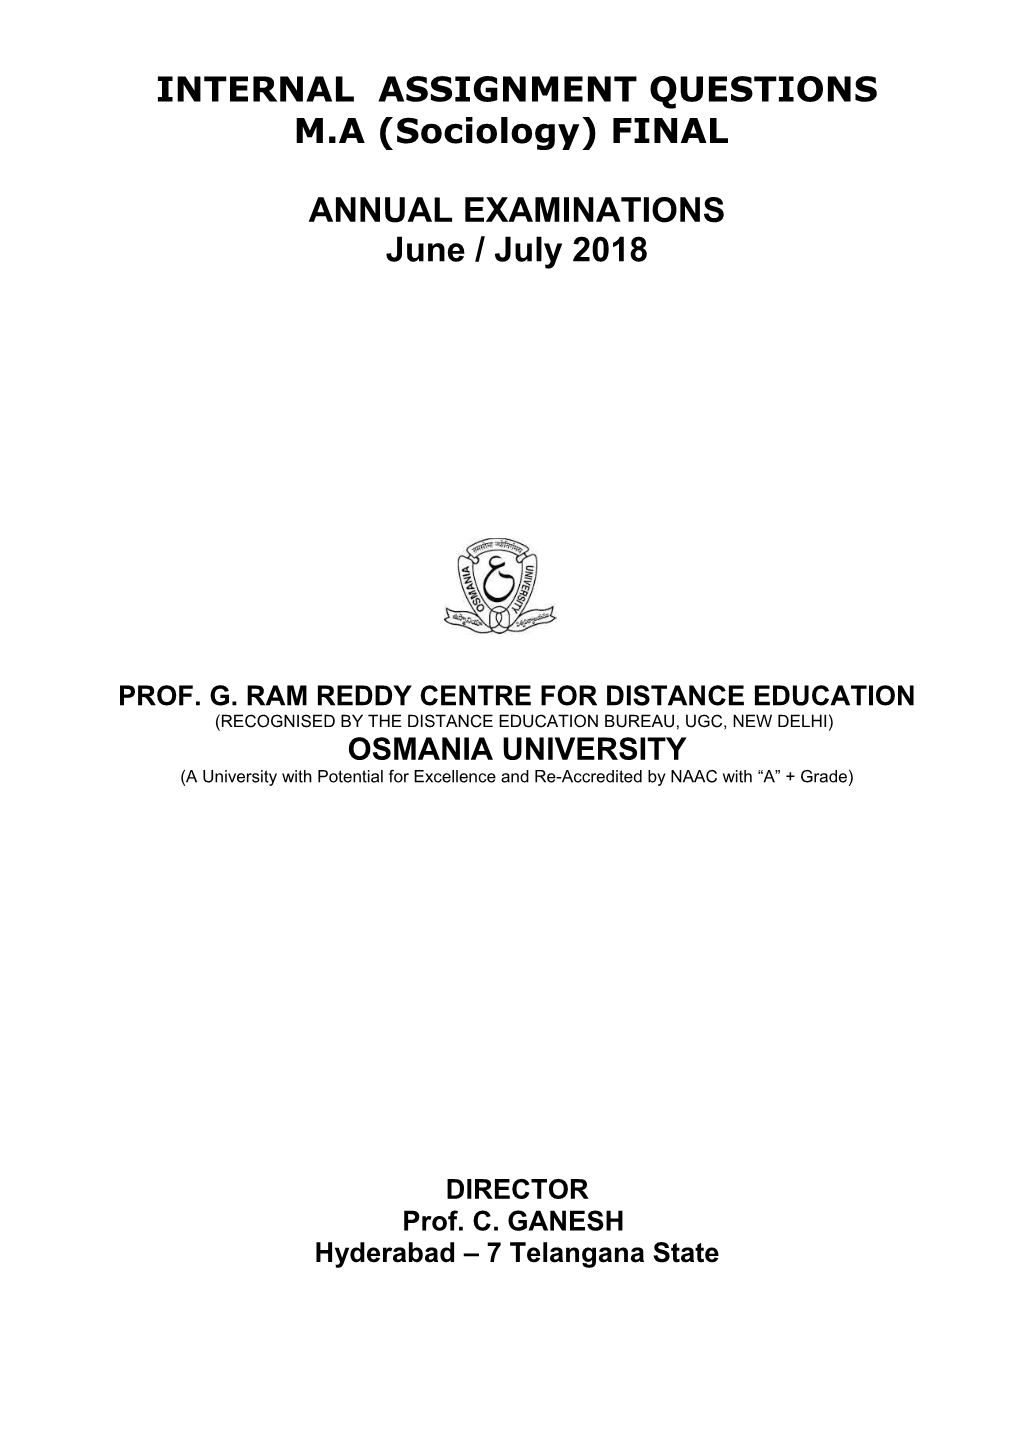 Prof. G. Ram Reddy Centre for Distance Education